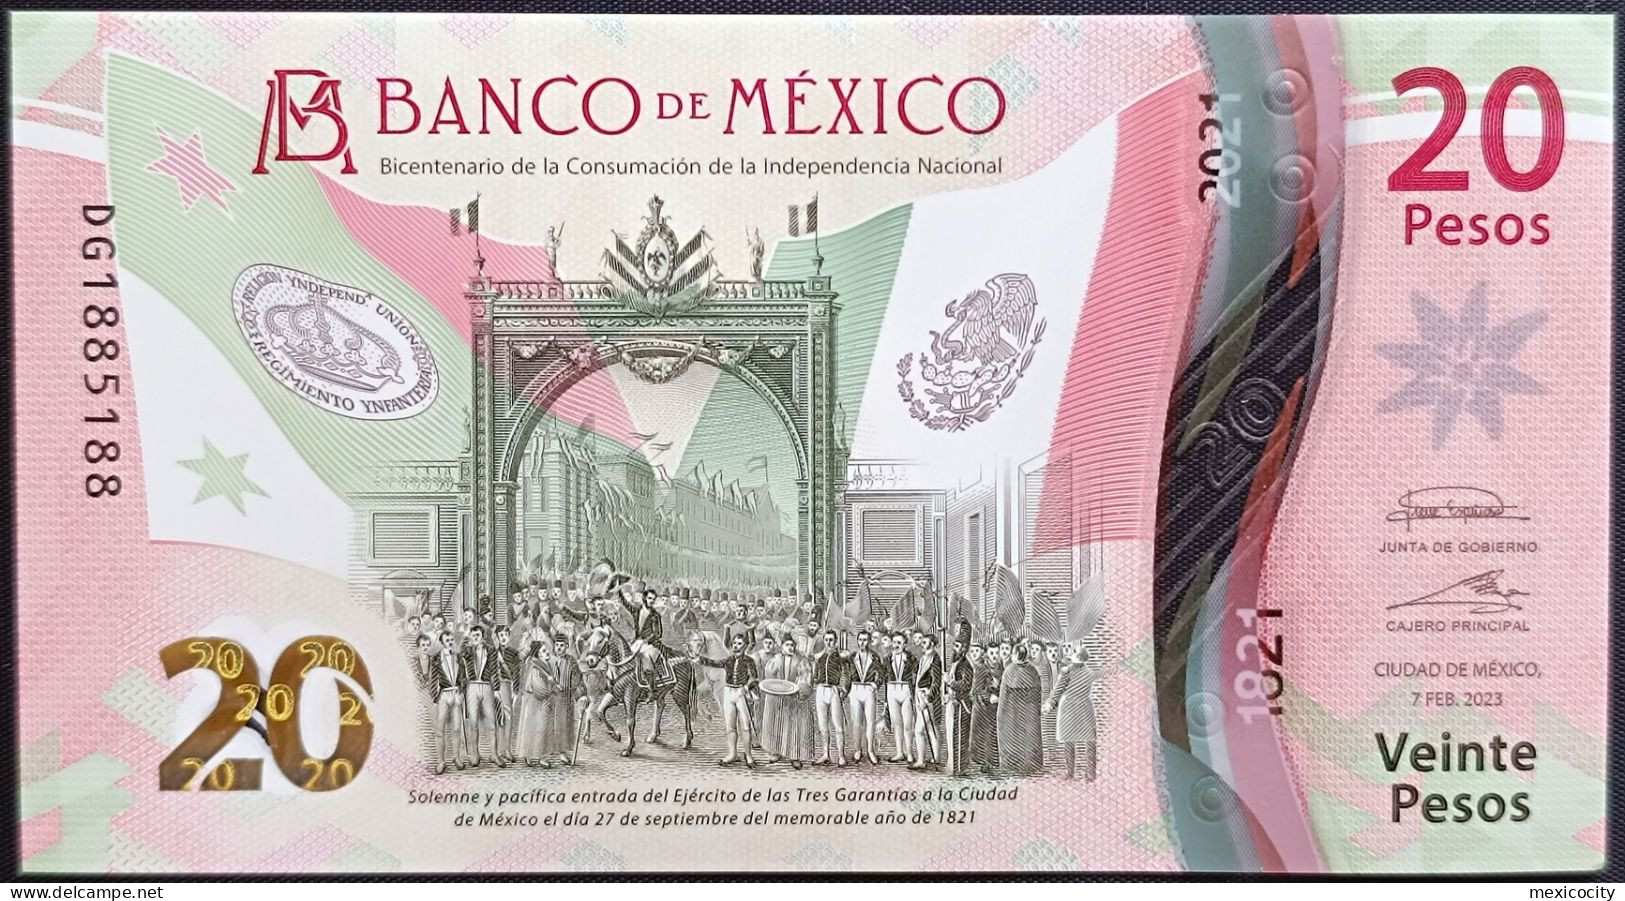 MEXICO $20 SERIES DG1885188 REPEAT # - 7-FEBR-2023 INDEPENDENCE POLYMER NOTE BU Mint Crisp - Mexique